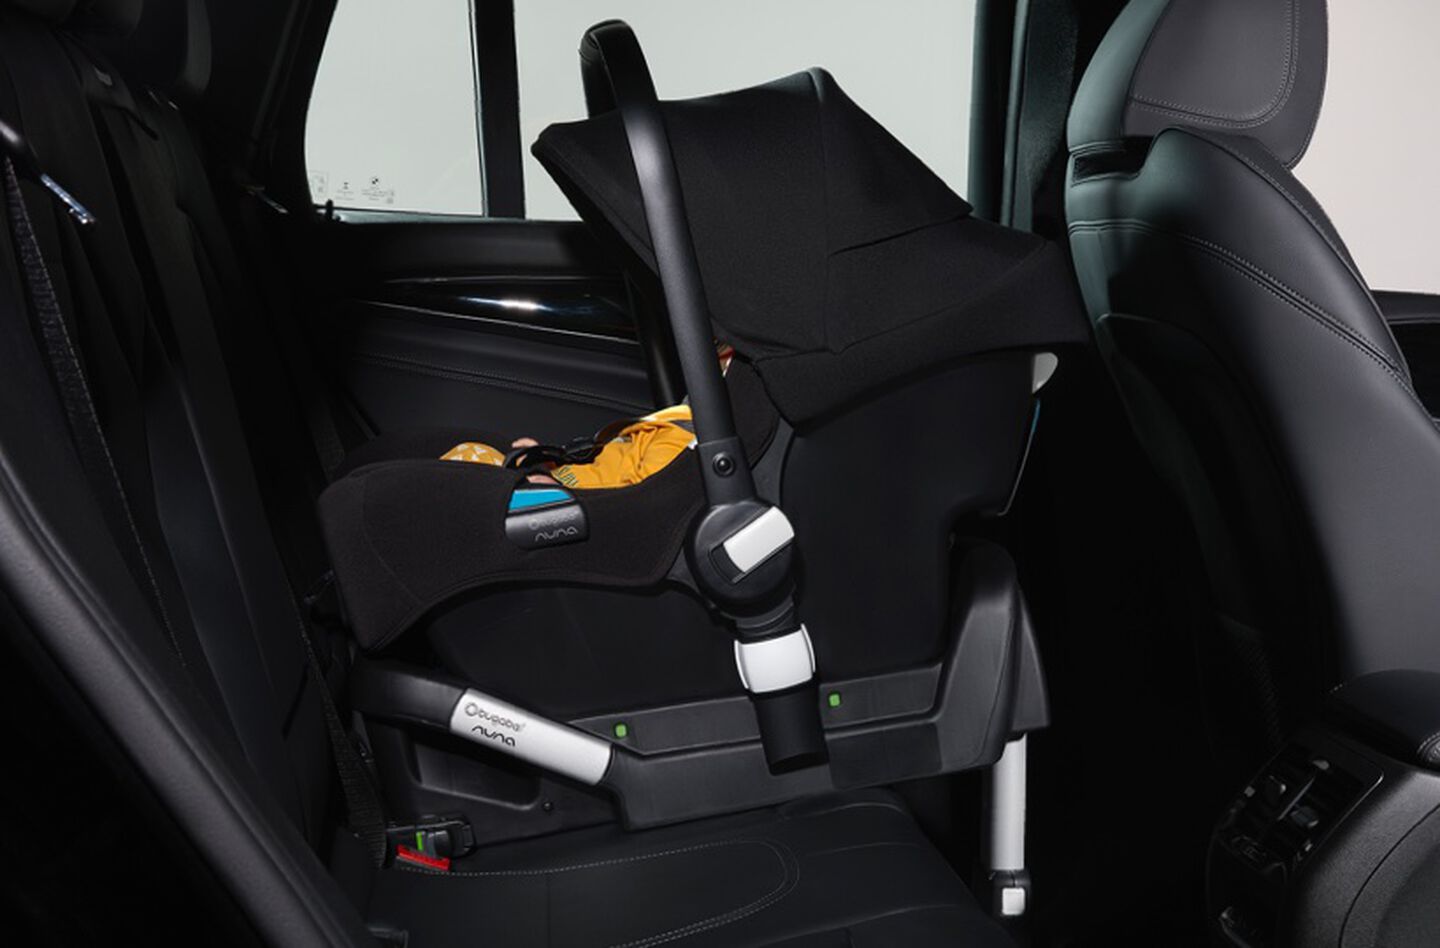 Choosing the best 3-in-1 travel system | Bugaboo Blog